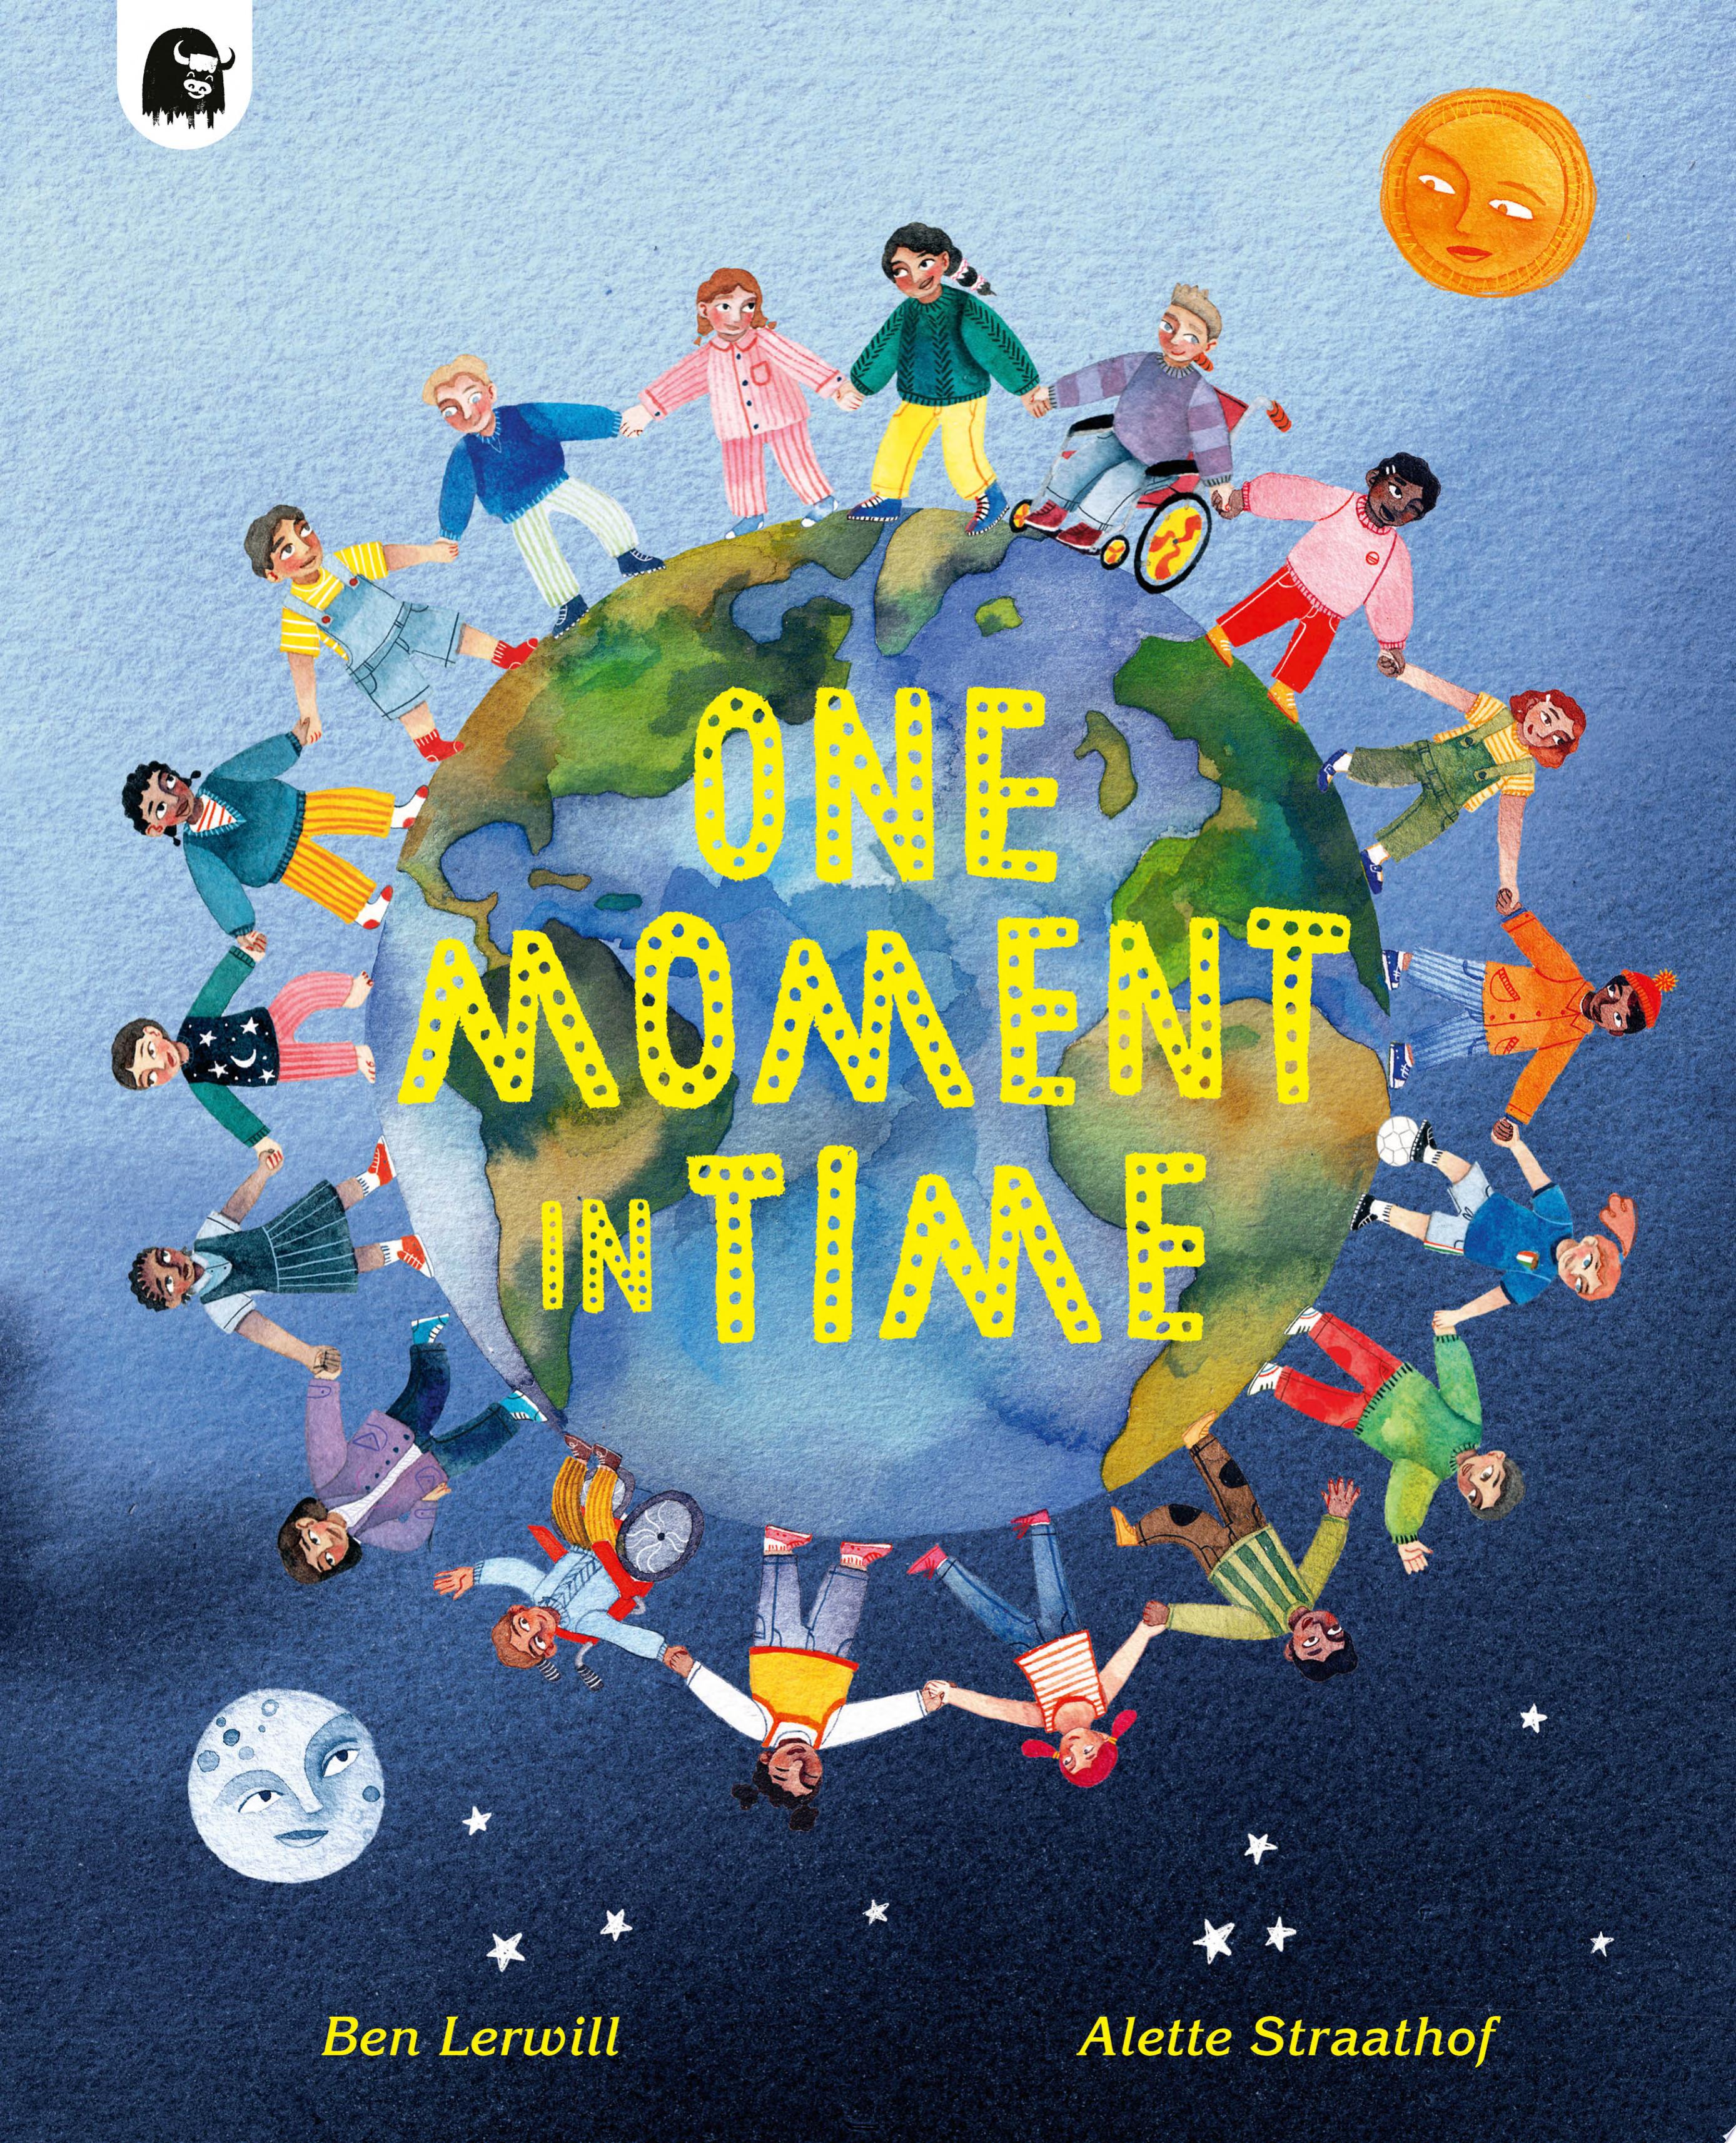 Image for "One Moment in Time"